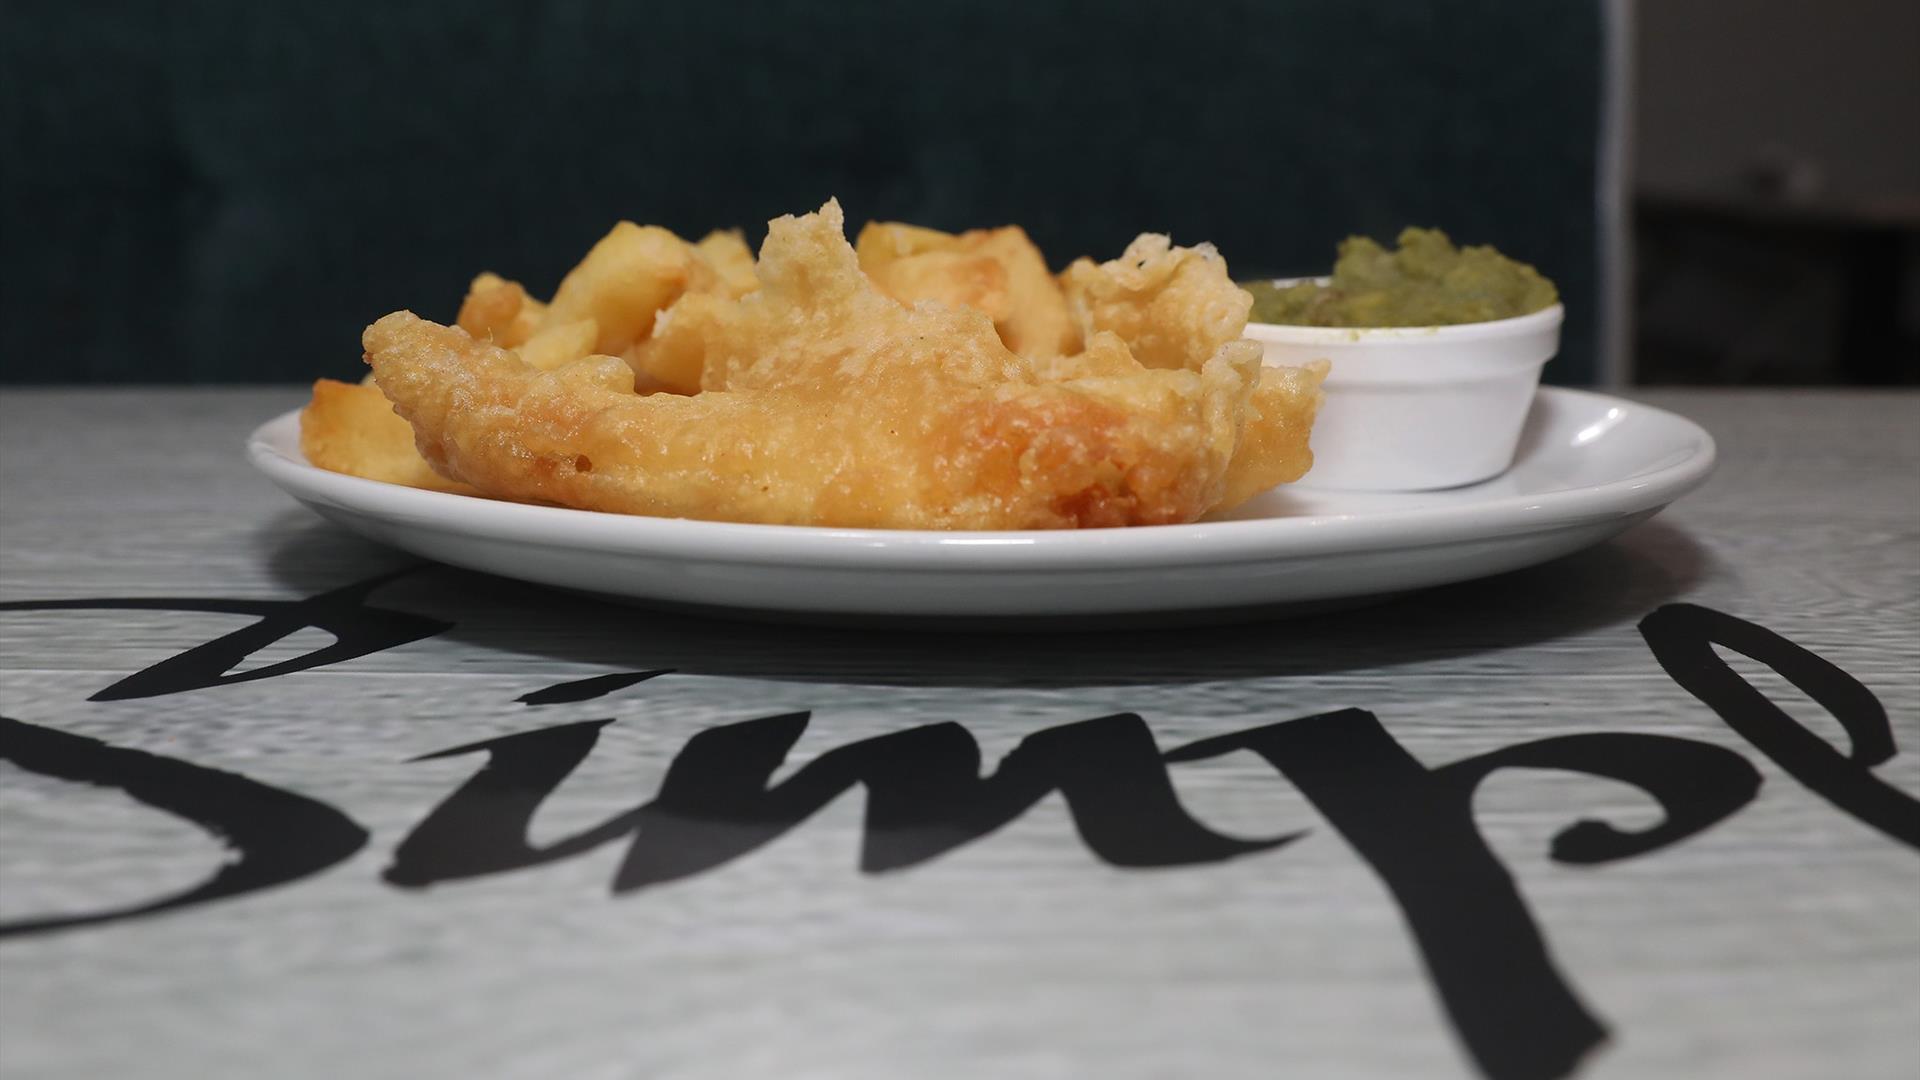 Image is of a plate of fish, chips and mushy peas